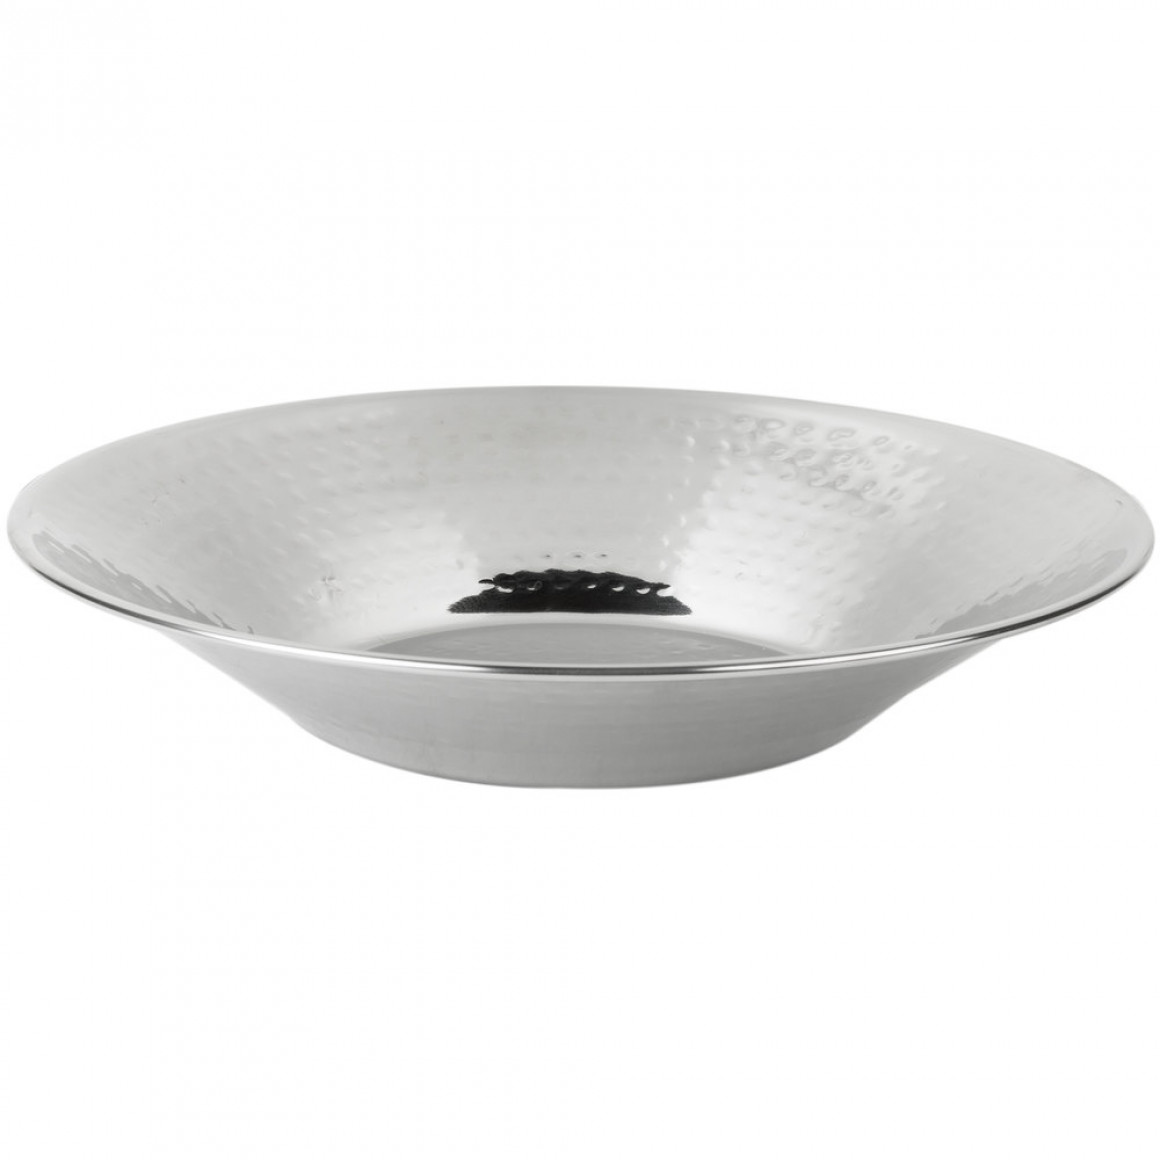 STAINLESS STEEL, HAMMERED BOWL, ROUND, 85 OZ.